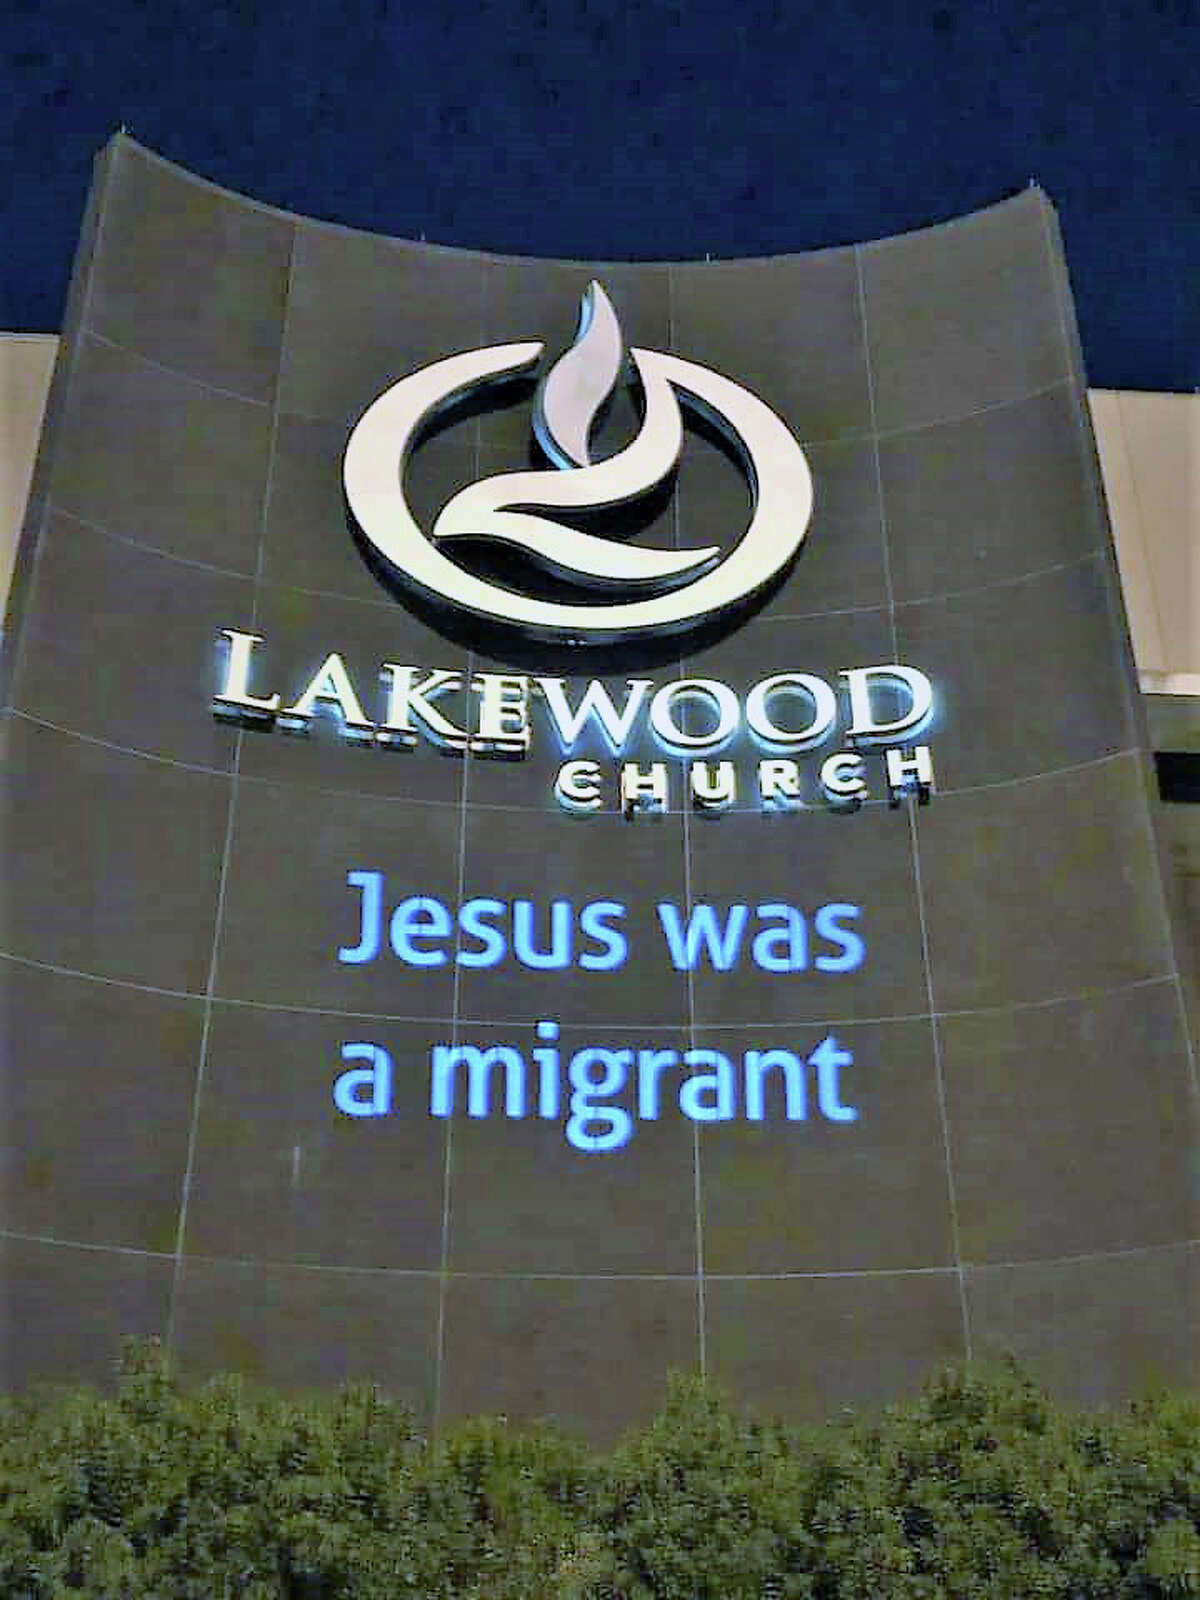 Indivisible Houston projects the message "Jesus was a migrant" on the front sign at Lakewood Church. The group was asked to leave by a security guard and two officers. >>> Click through to see more messages projected on local buildings by Indivisible Houston.